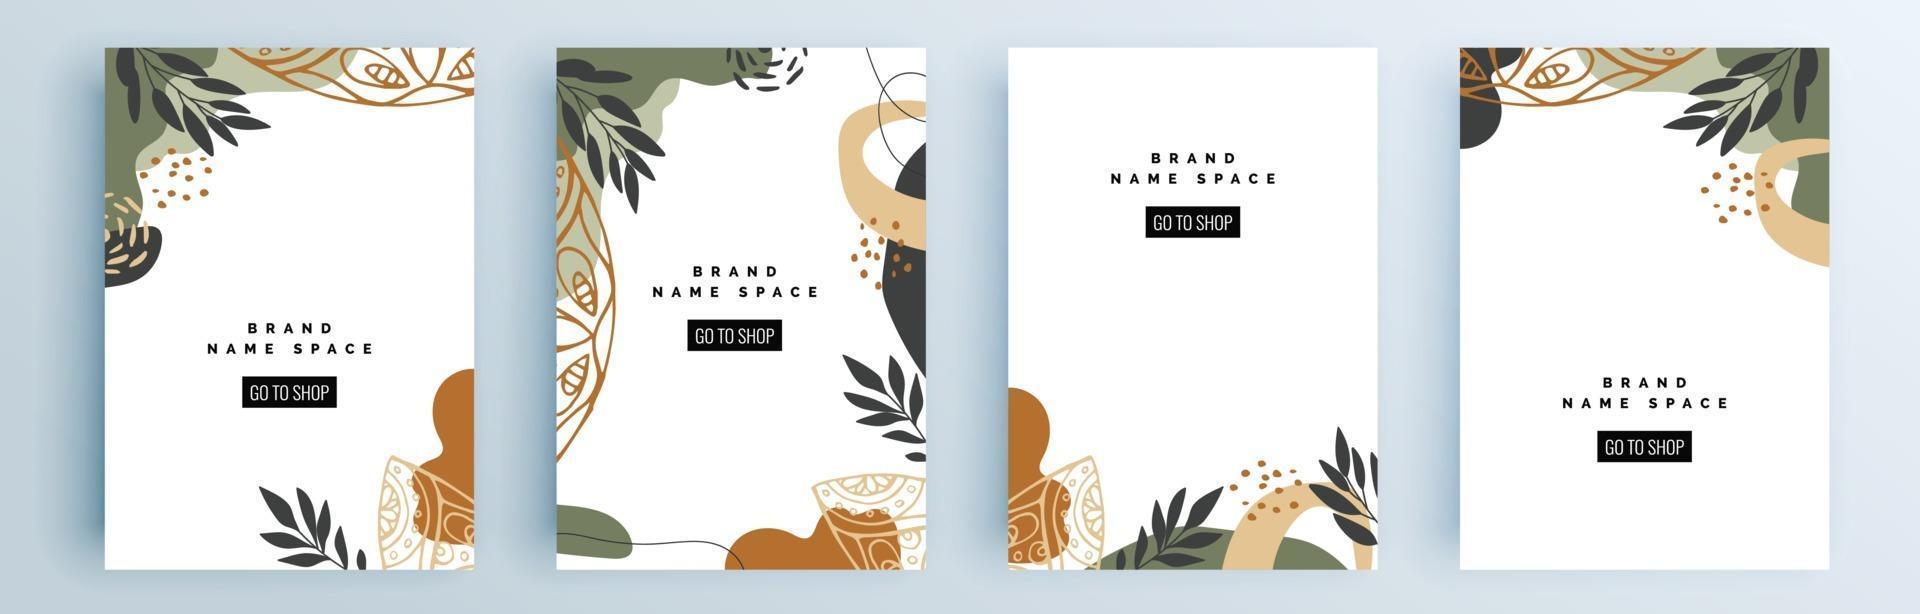 Modern abstract covers set, minimal covers design, colorful geometric vector